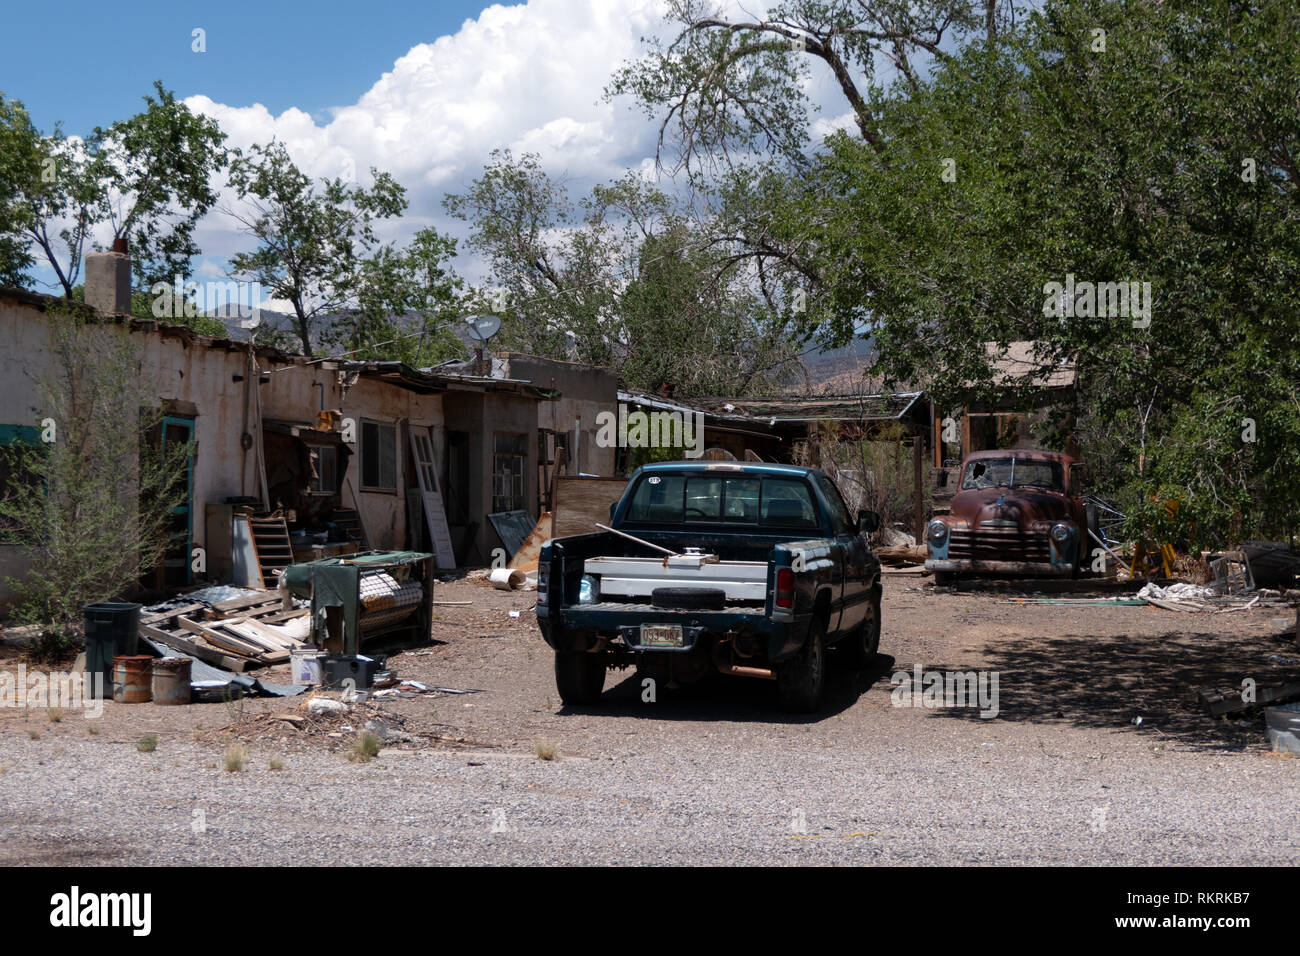 Backyard with old car and junk in San Fidel, New Mexico, United States of America Stock Photo